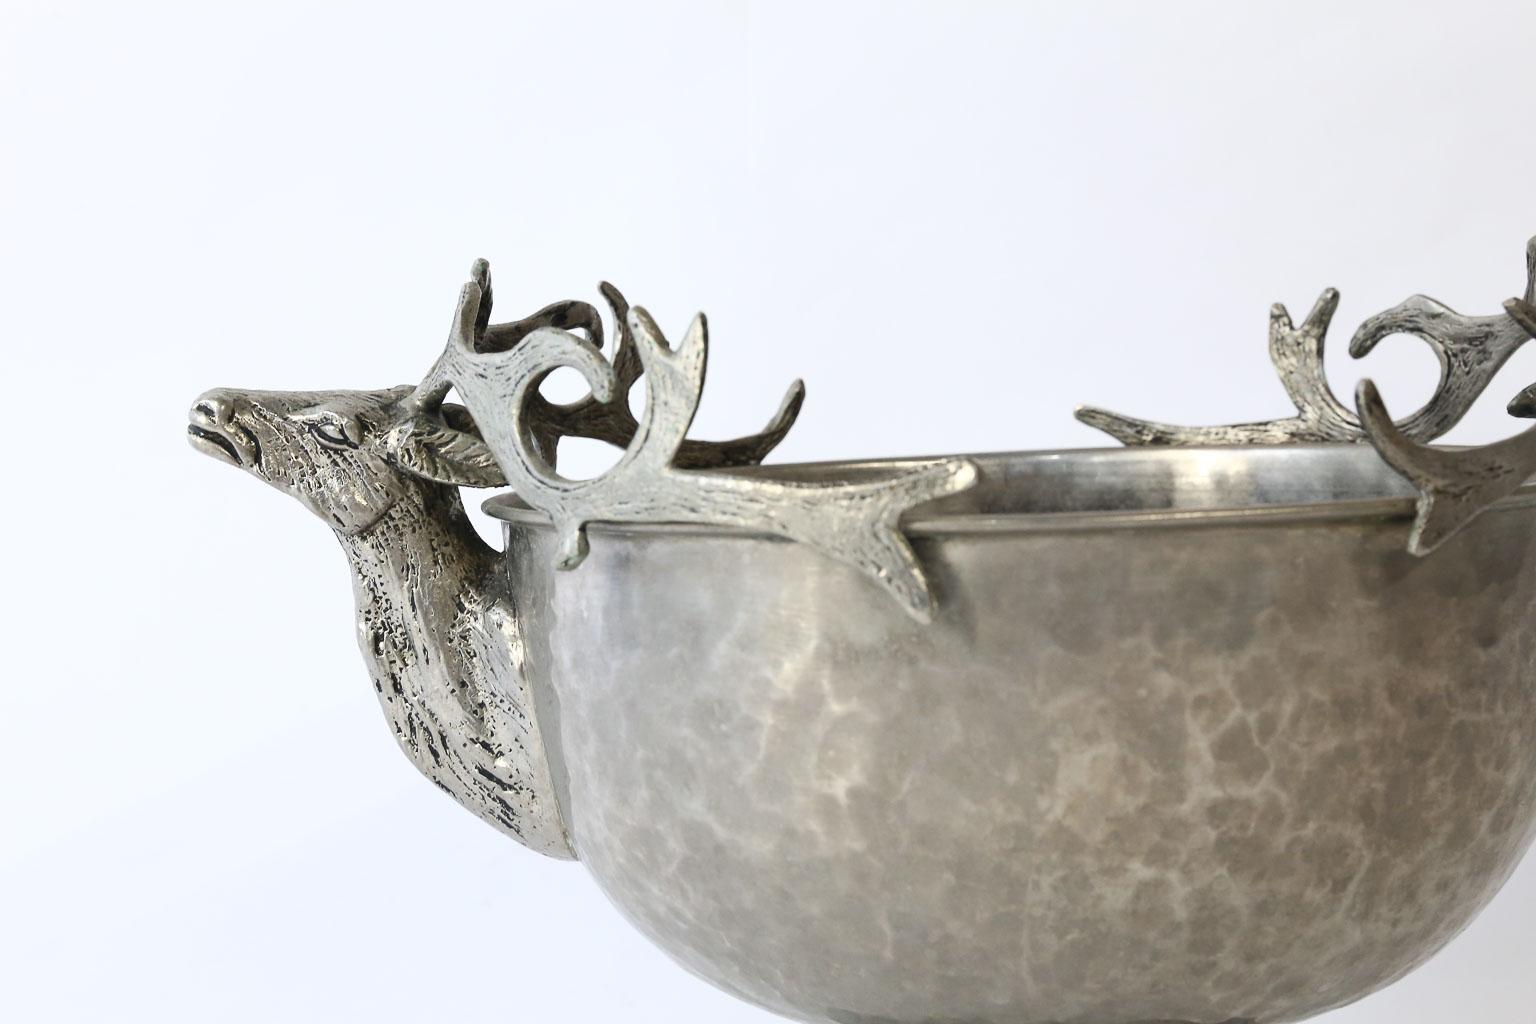 This beautiful hammered metal footed bowl is embellished with stag heads and a textured base. The base resembles roots of a tree for a woodland effect. This piece could be used as a centerpiece with flowers or as an ice bucket to chill wine or